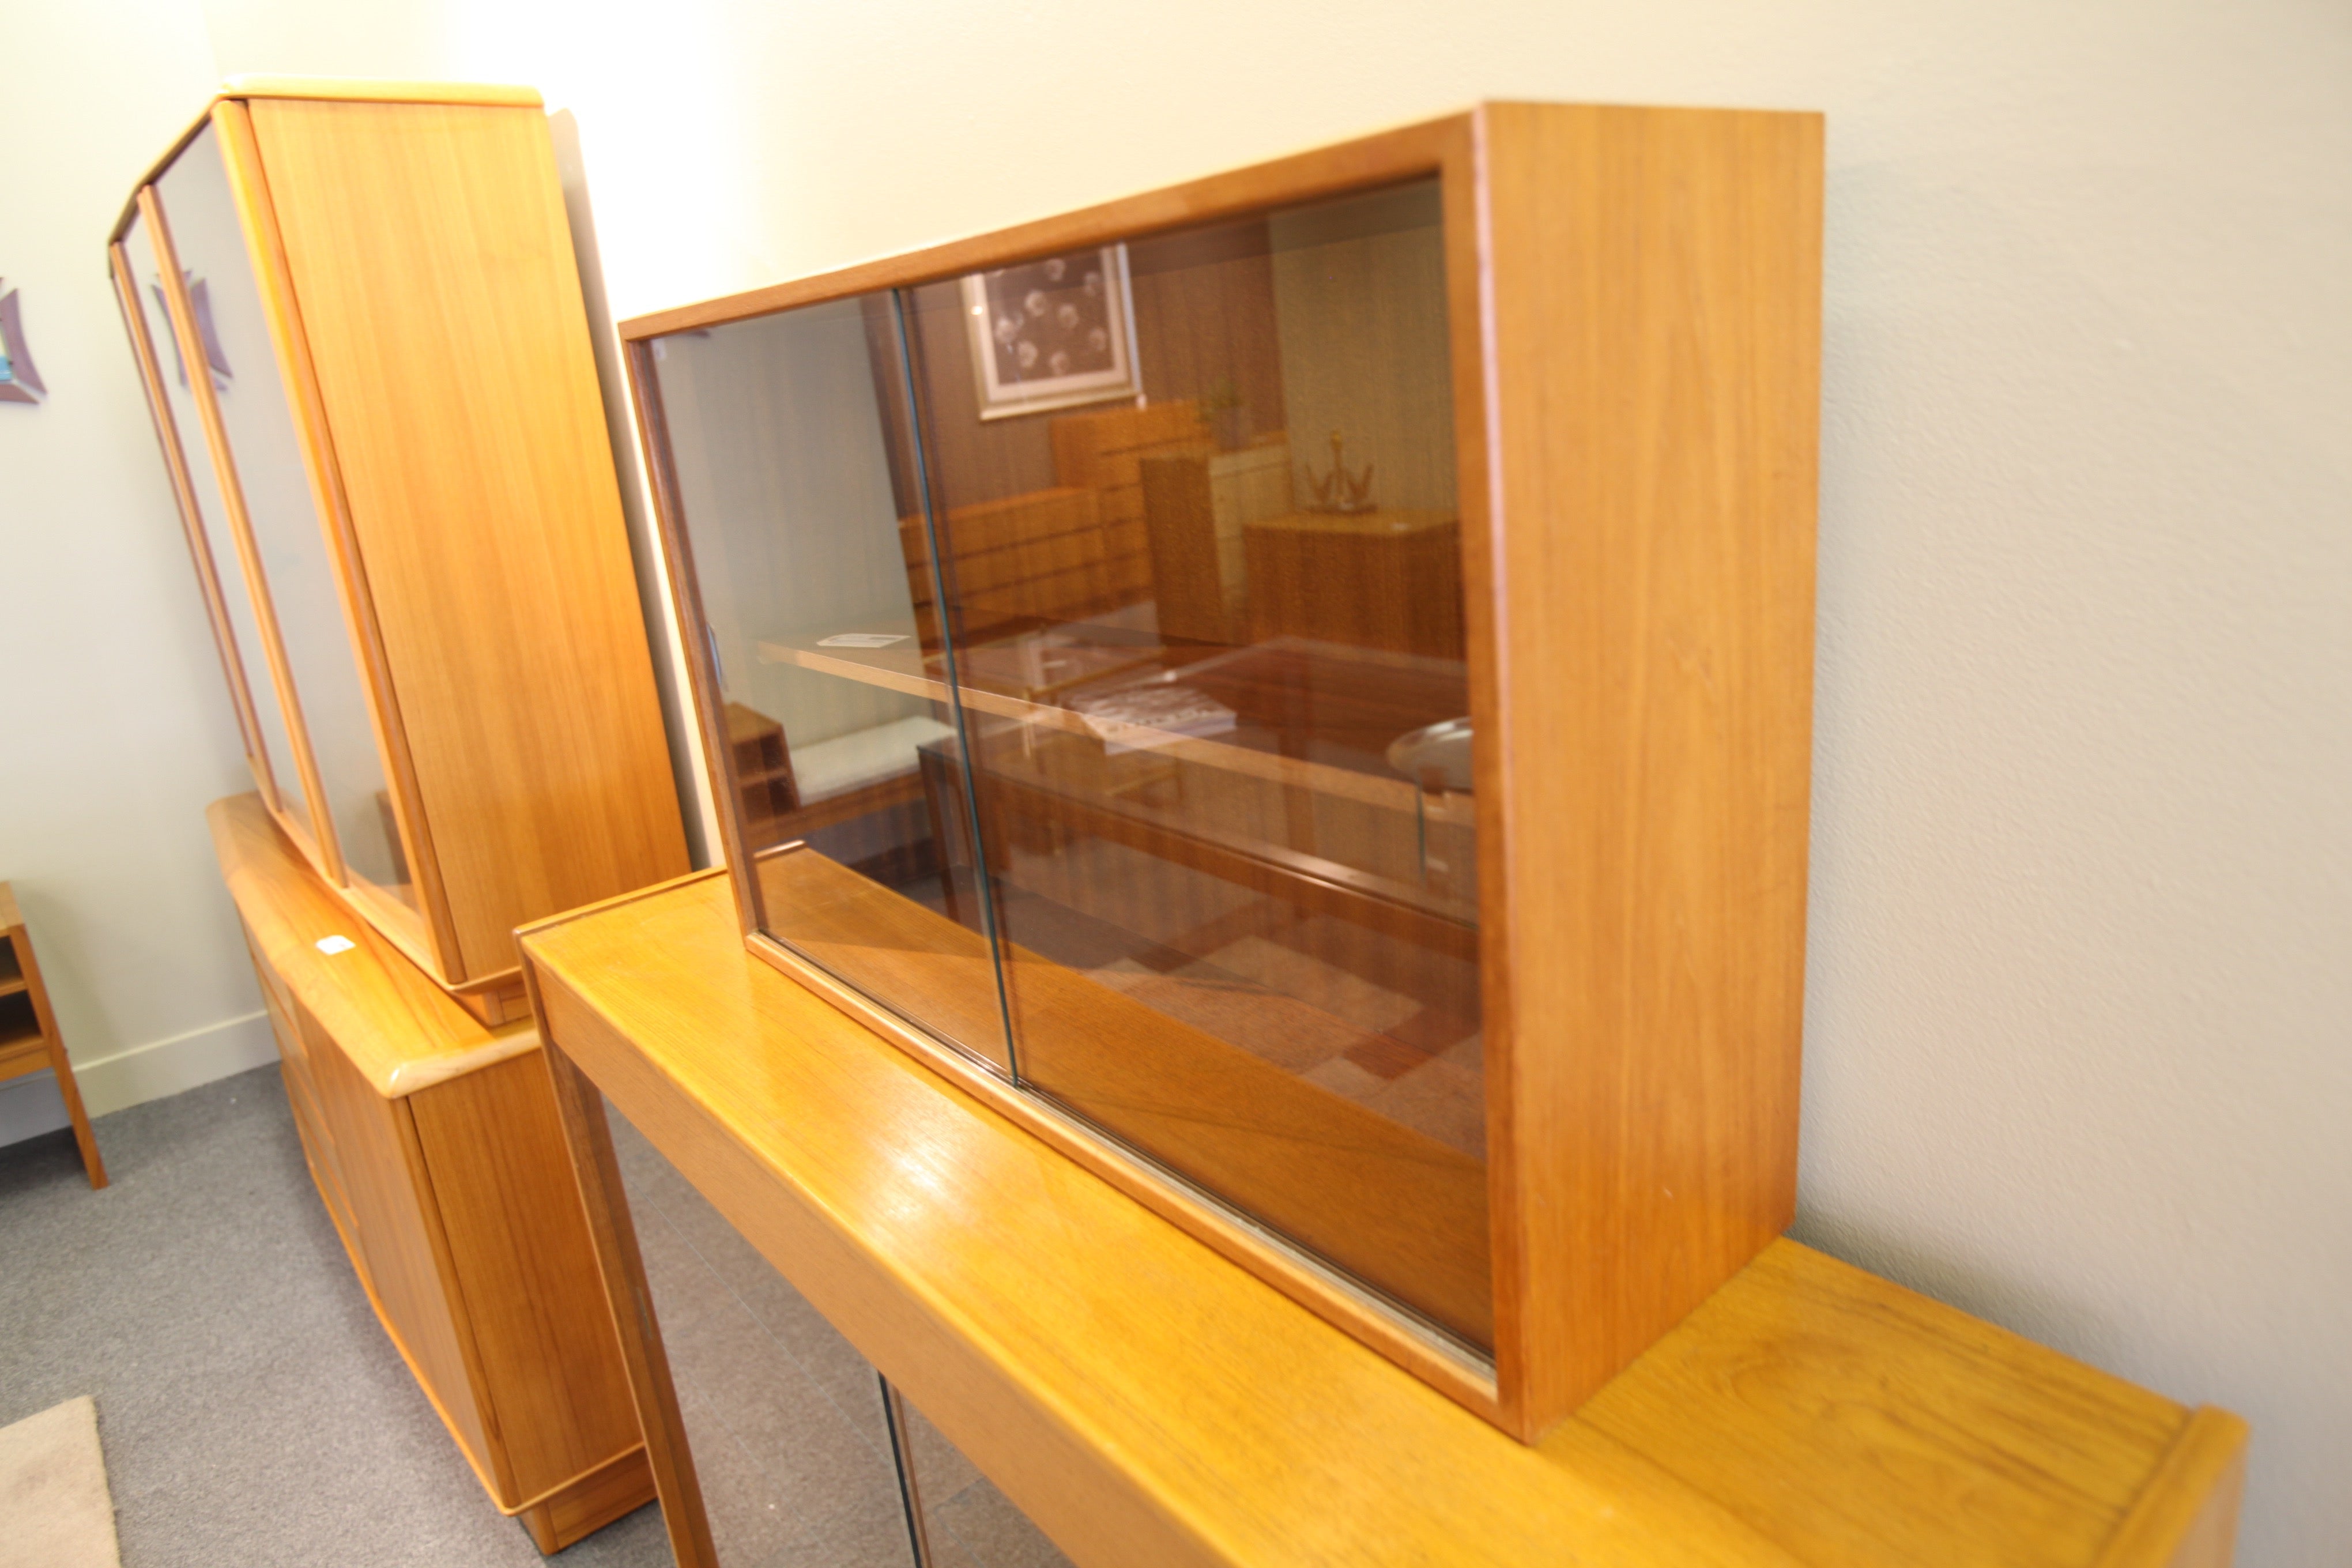 Small Teak Cabinet with Sliding Glass doors (31.5"W x 19.75"H x 9"D)